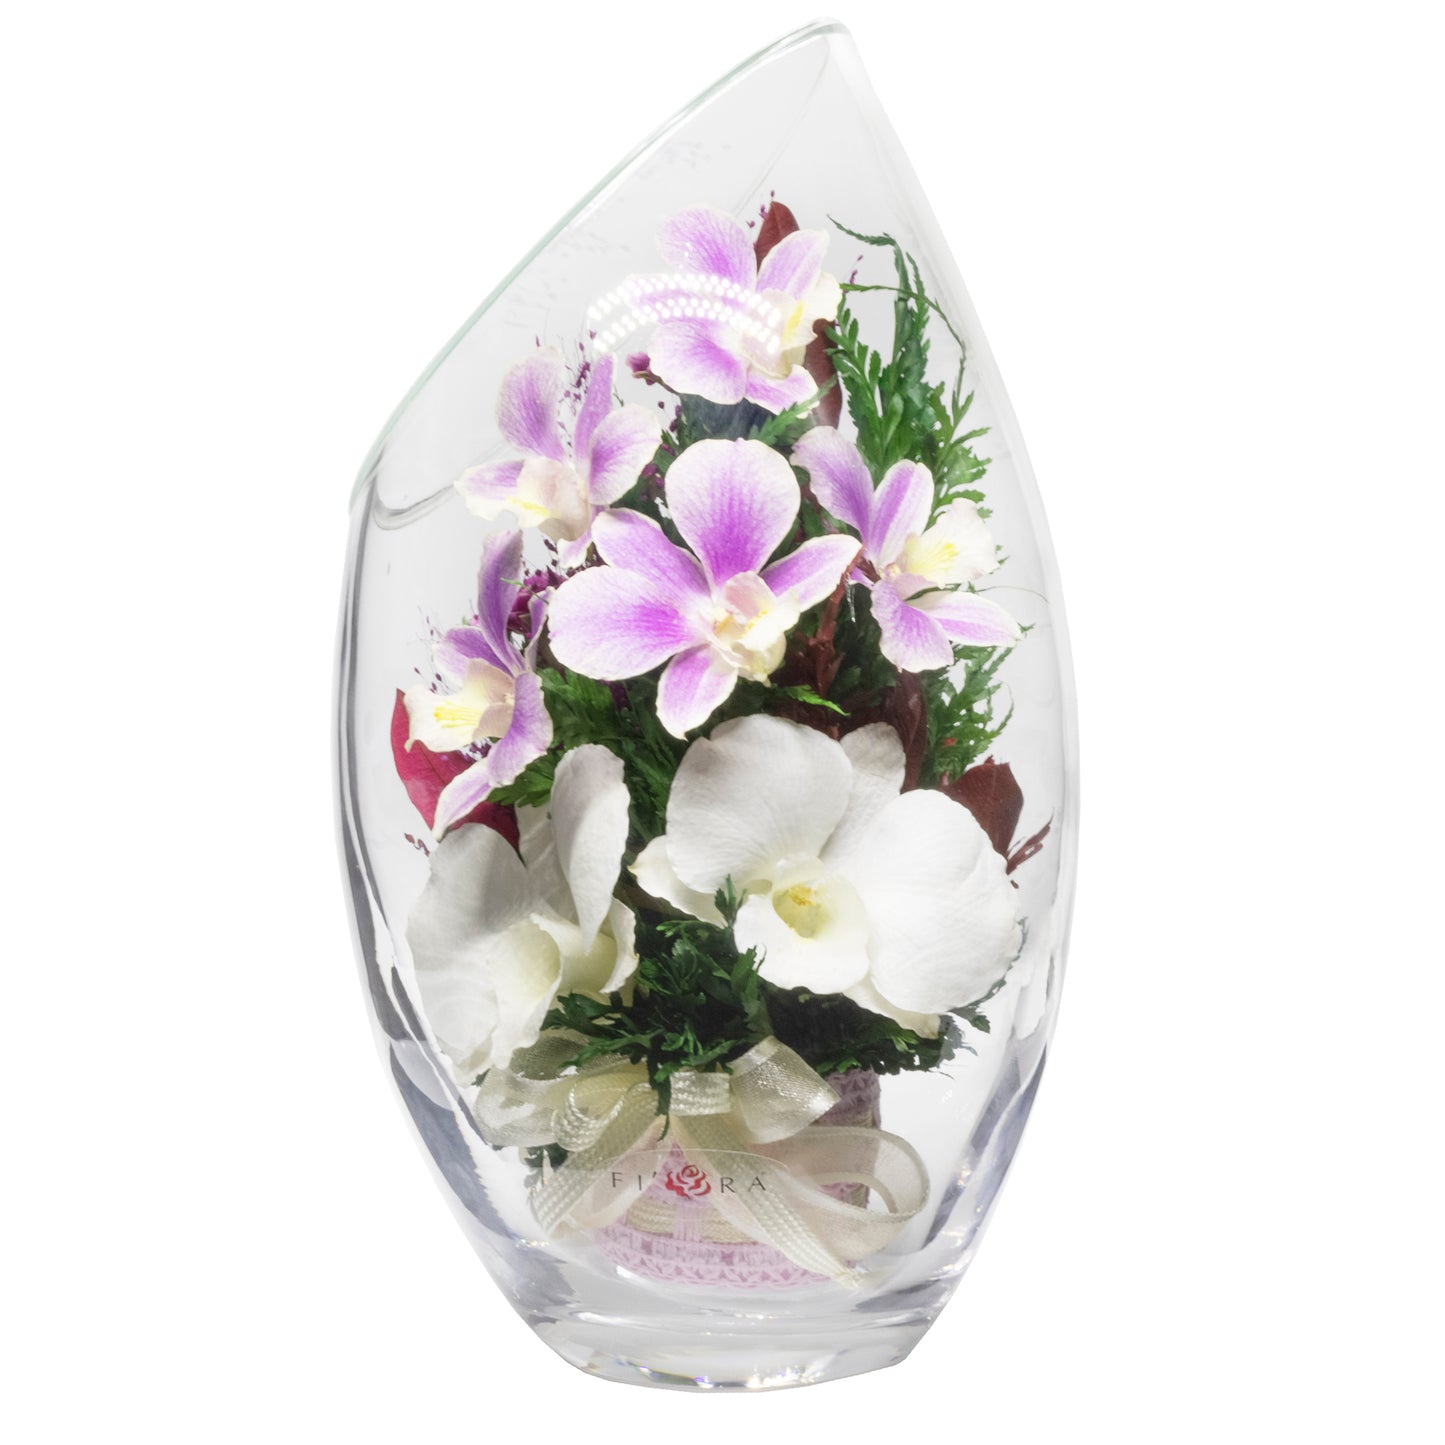 71805 Long-Lasting Purple Orchids,  Limoniums with Greenery in a Flat Rugby Glass Vase